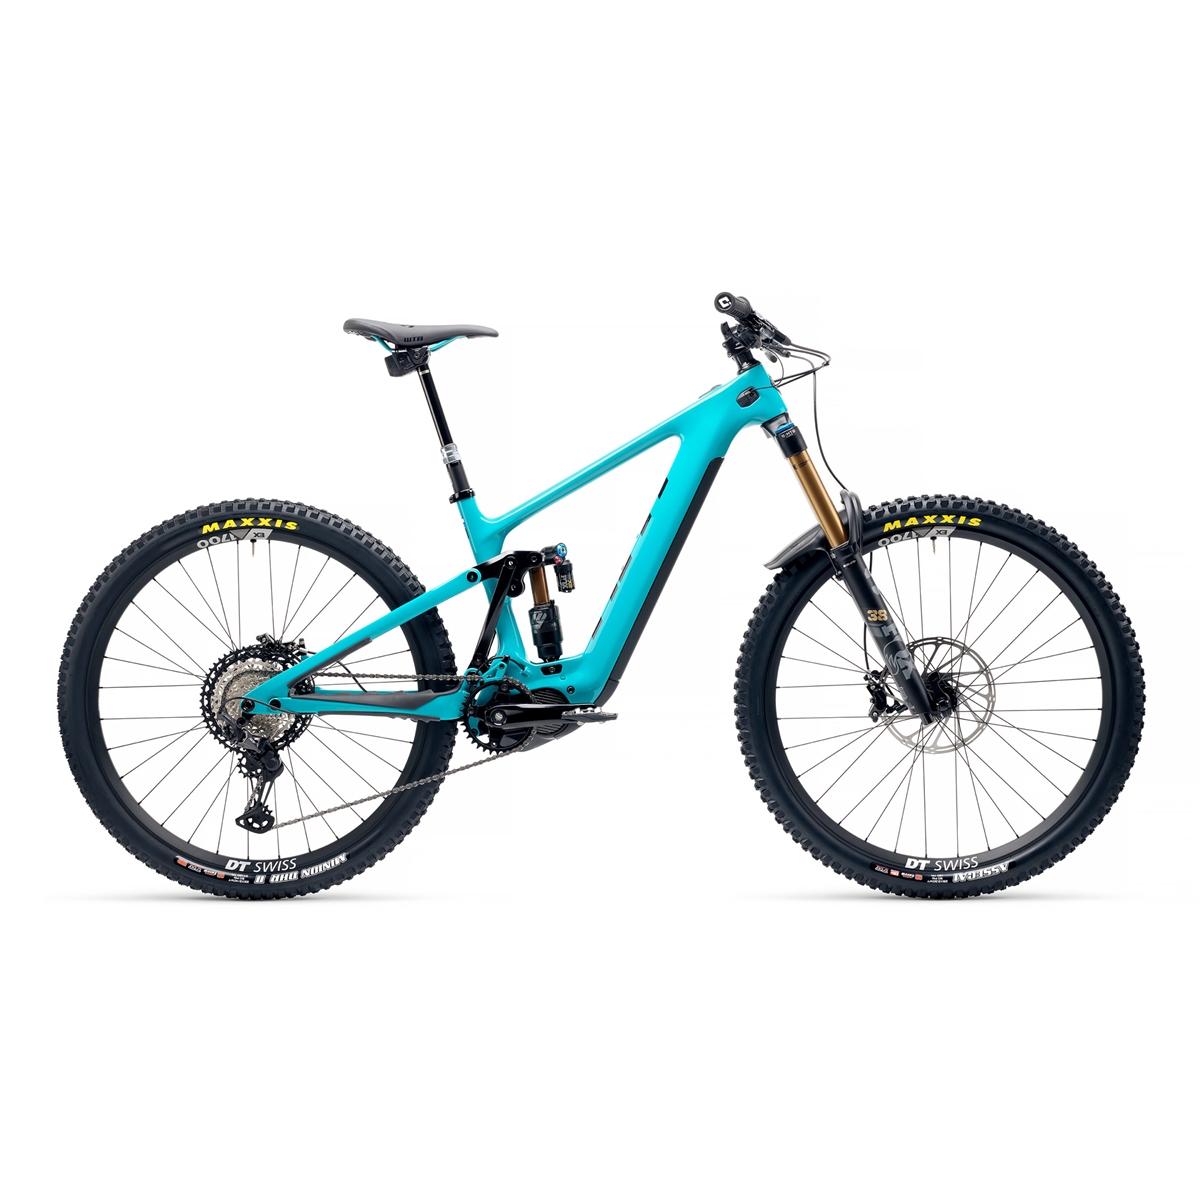 160E T1 29'' 170mm 12s 630Wh Shimano EP8 Turquoise Size S